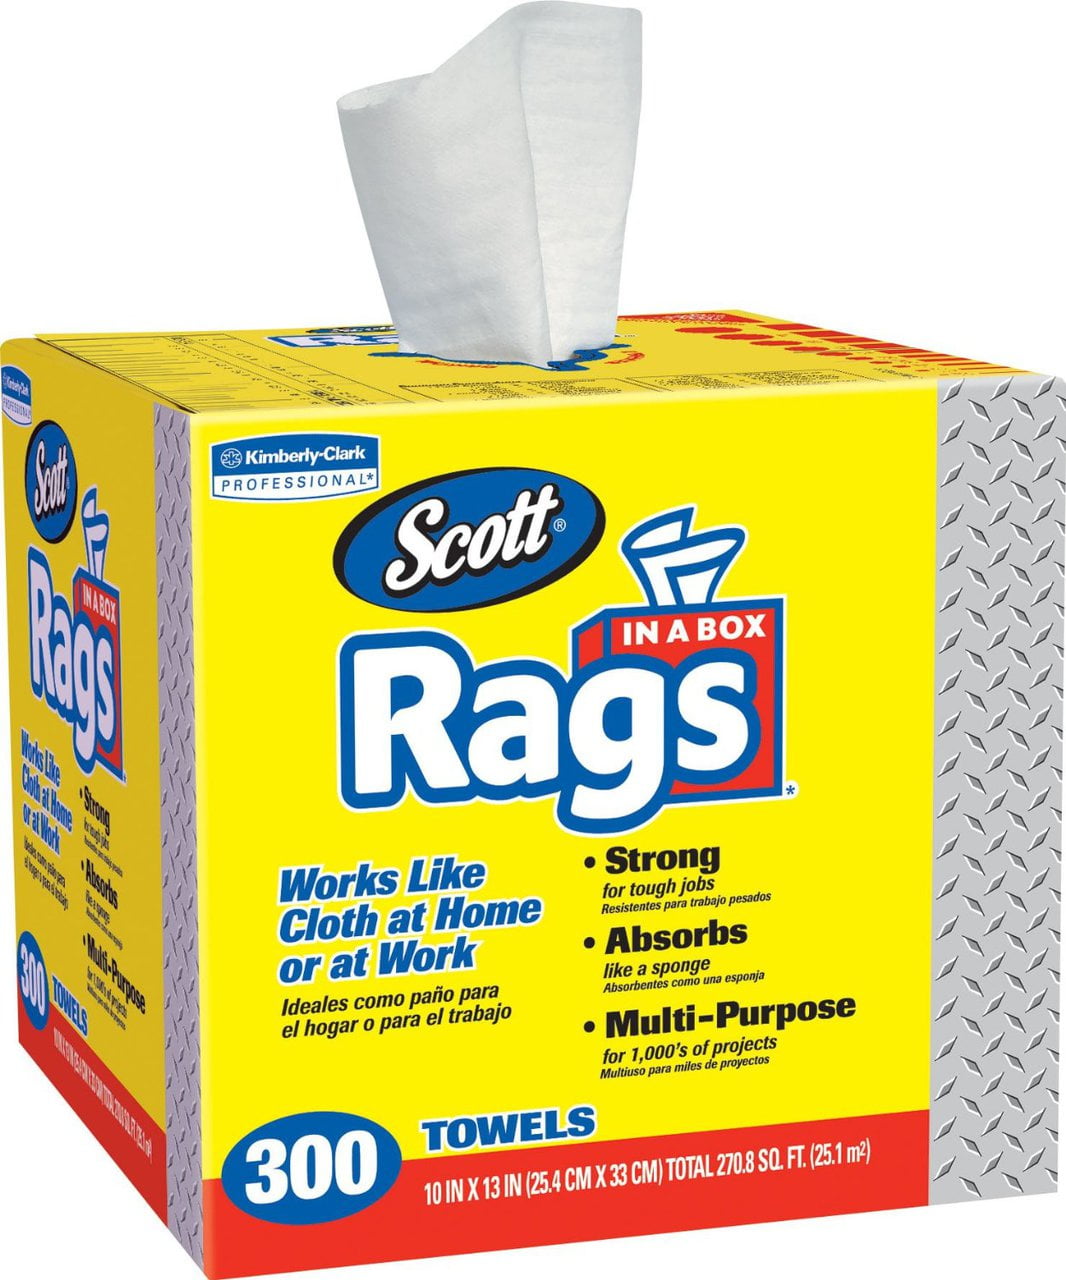 SCOTT Rags in A Box Shop Towels White 200 Pack for sale online 